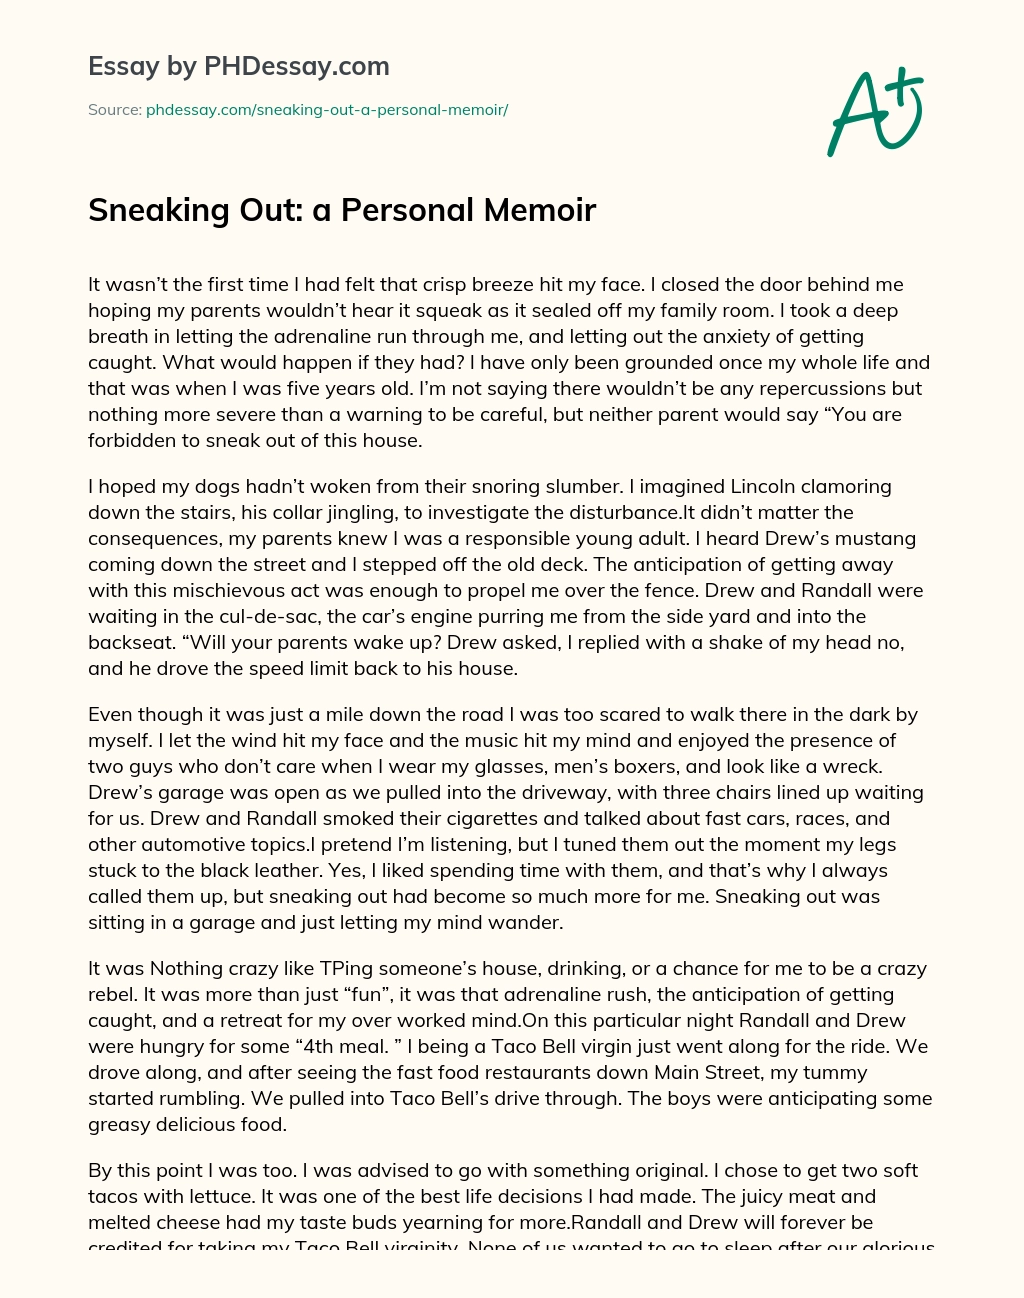 Sneaking Out: a Personal Memoir essay